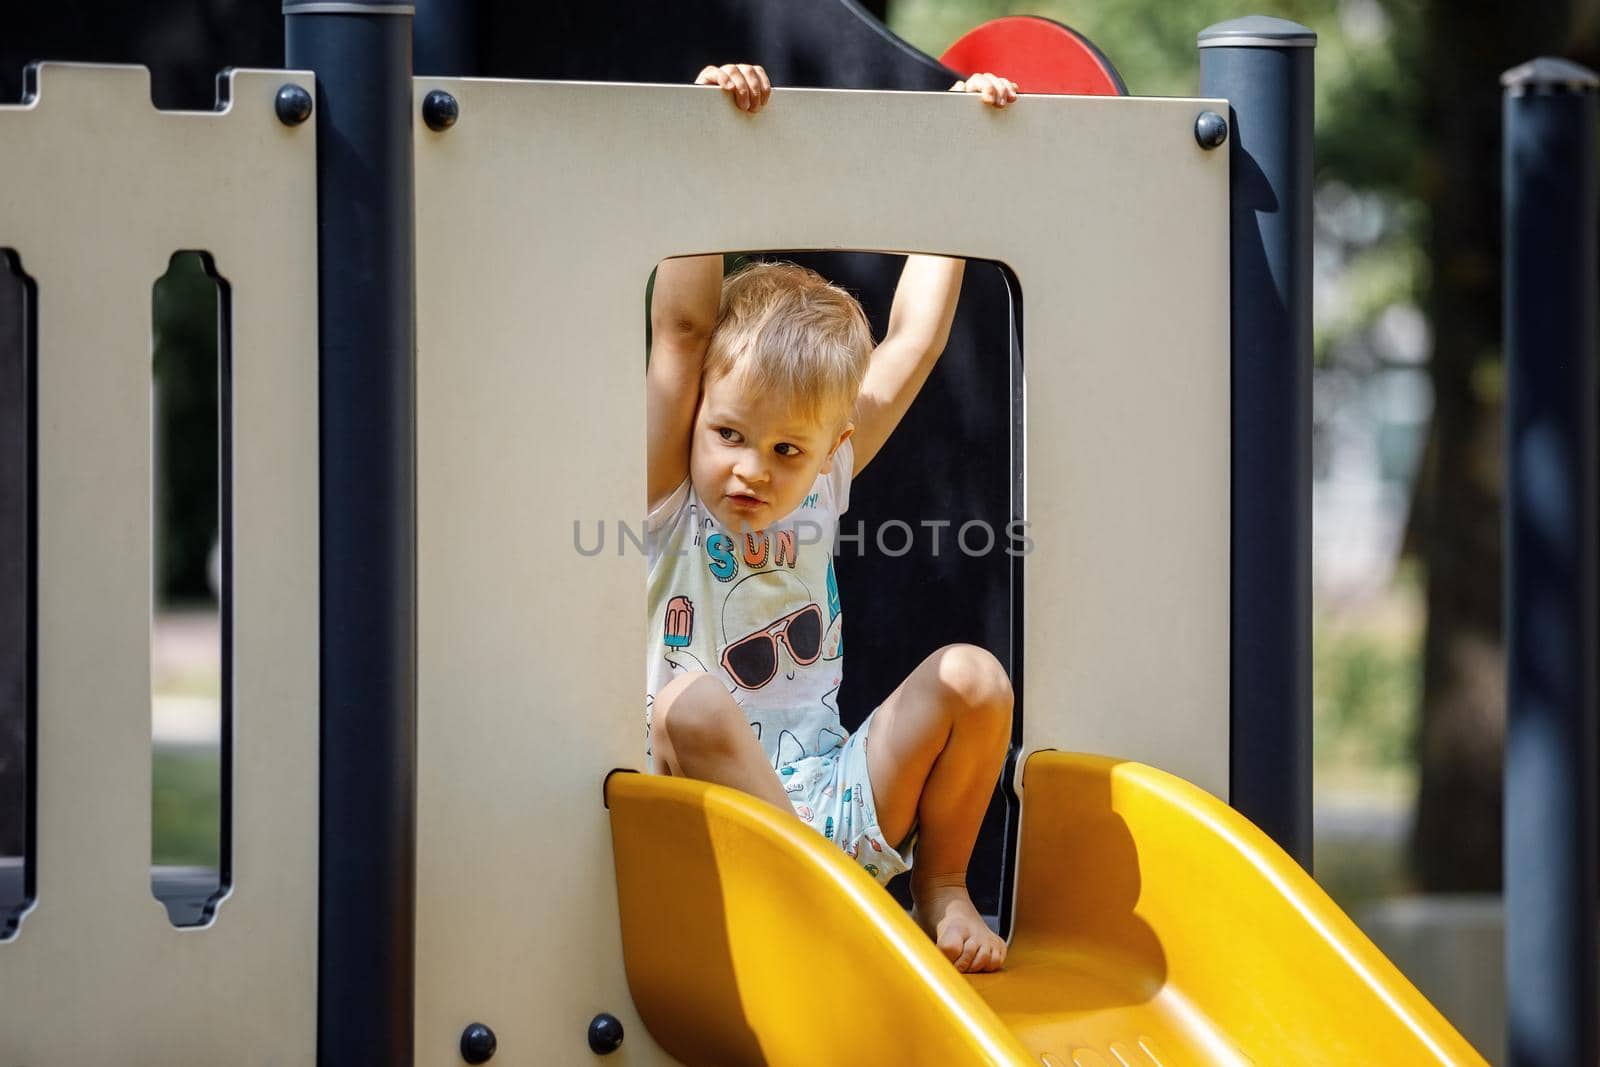 A little boy is ready to slide on a yellow, outdoor playground plastic slide. Horizontal photo.